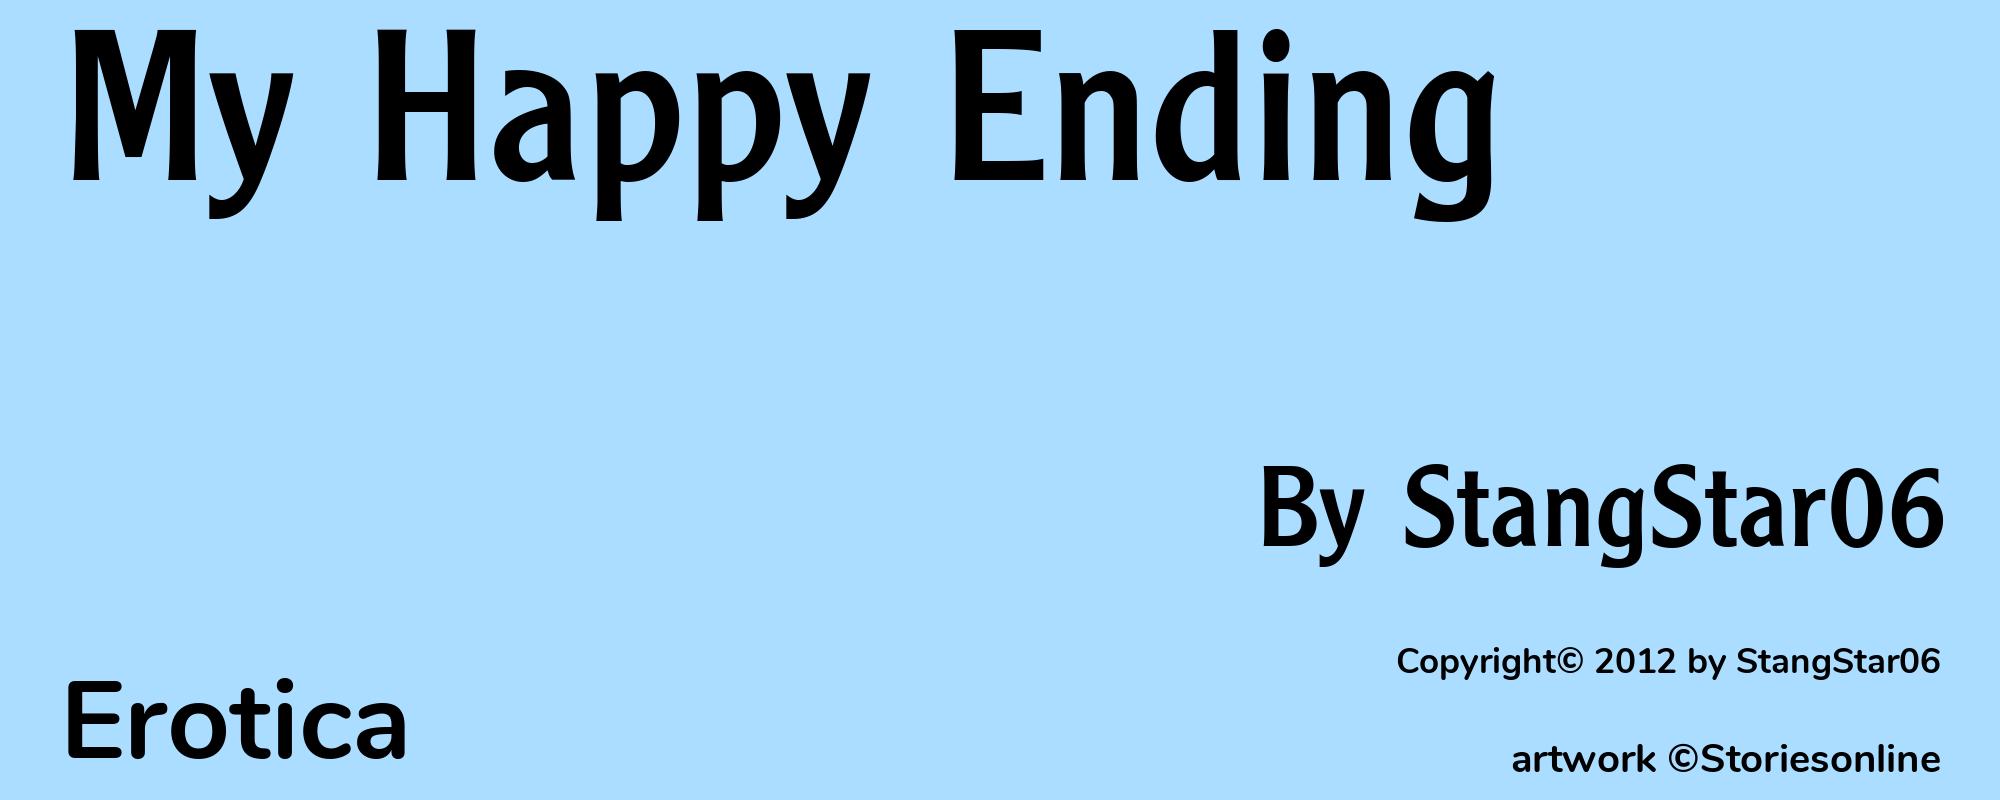 My Happy Ending - Cover